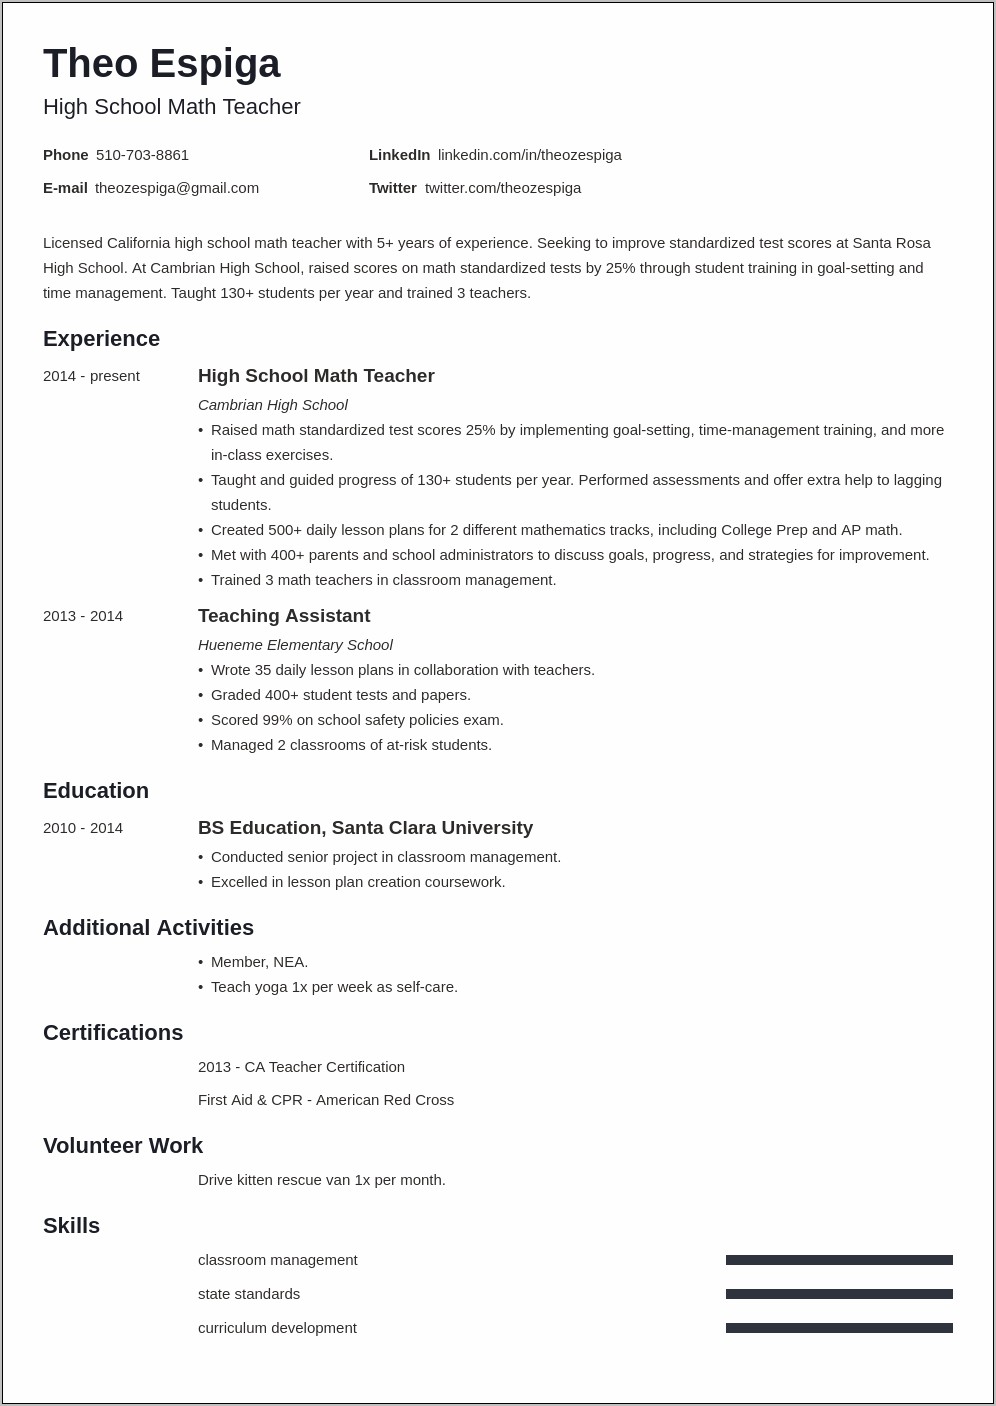 Do You Put In Progress Degree On Resume